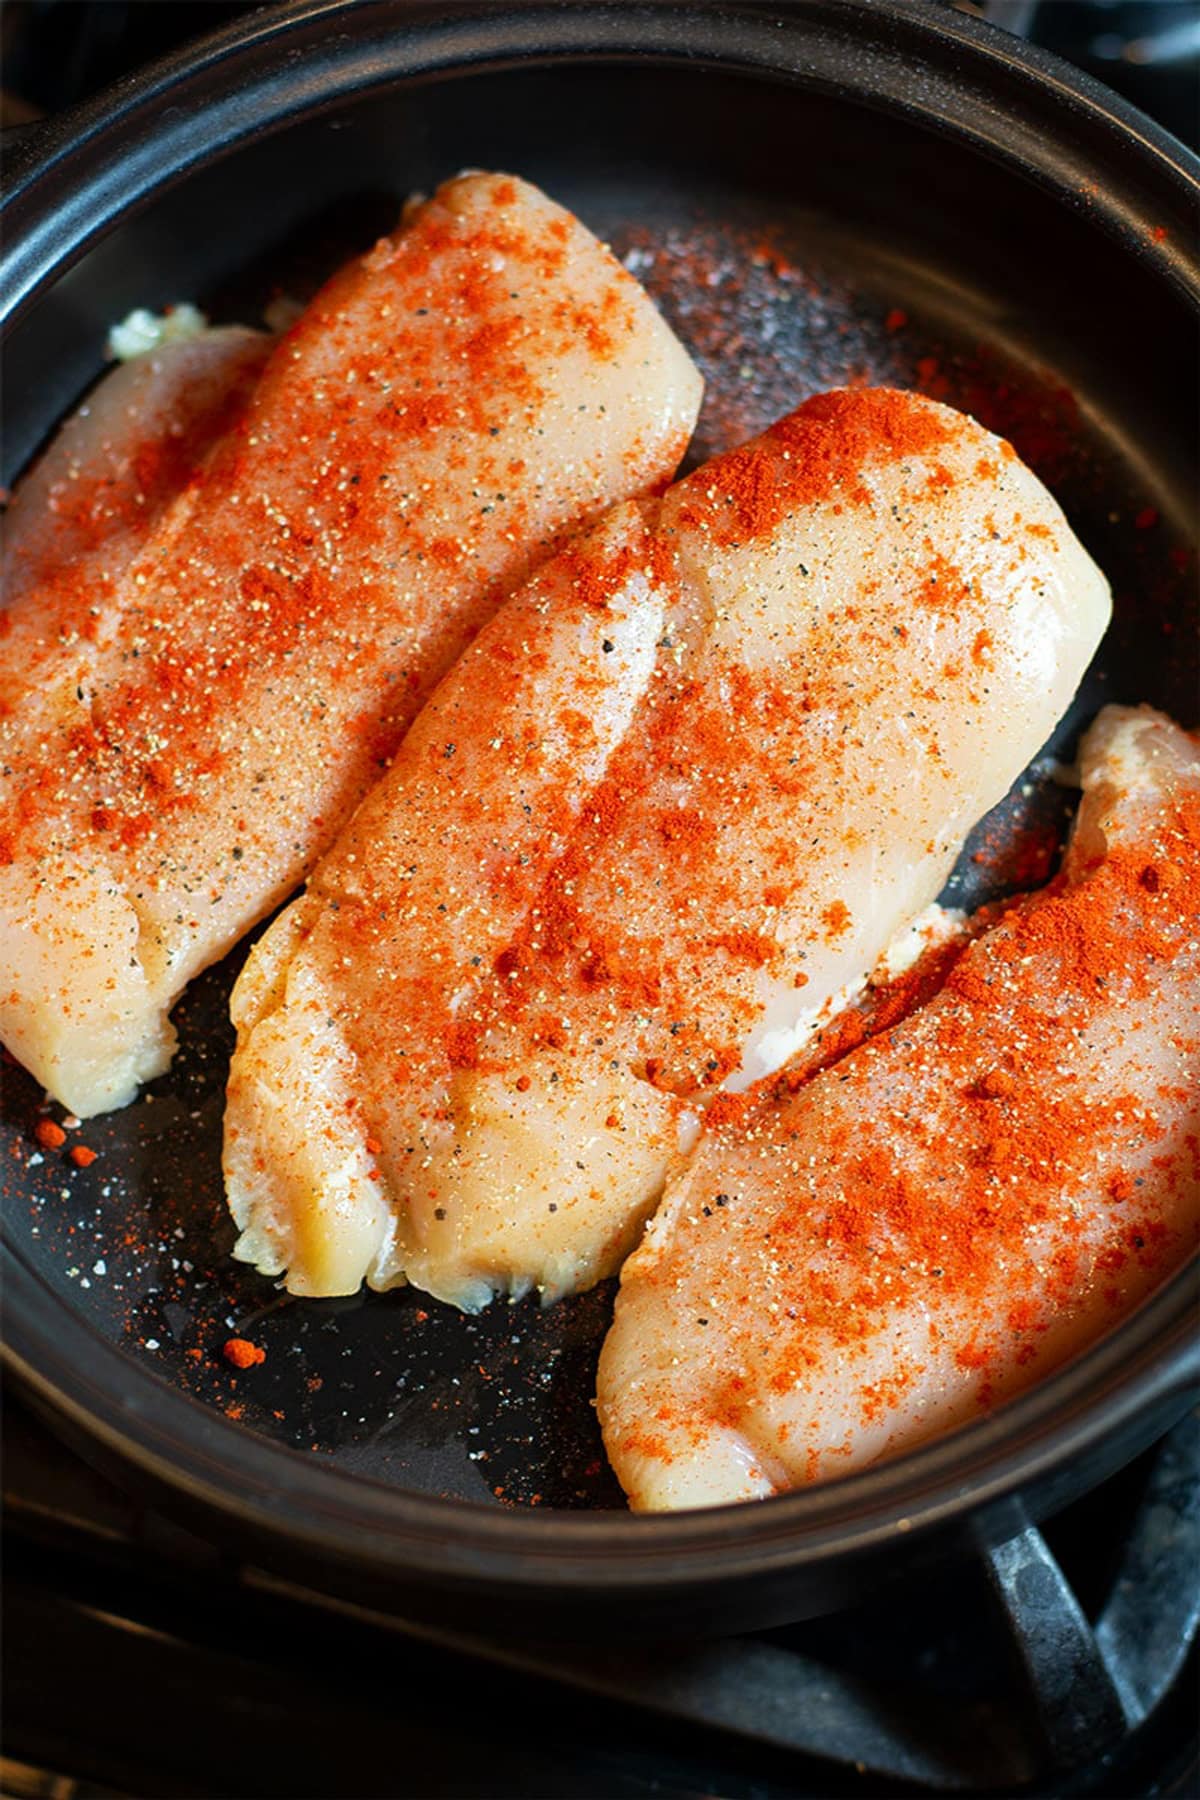 Three chicken breasts sprinkled with smoked Paprika, salt and pepper in a black pan.